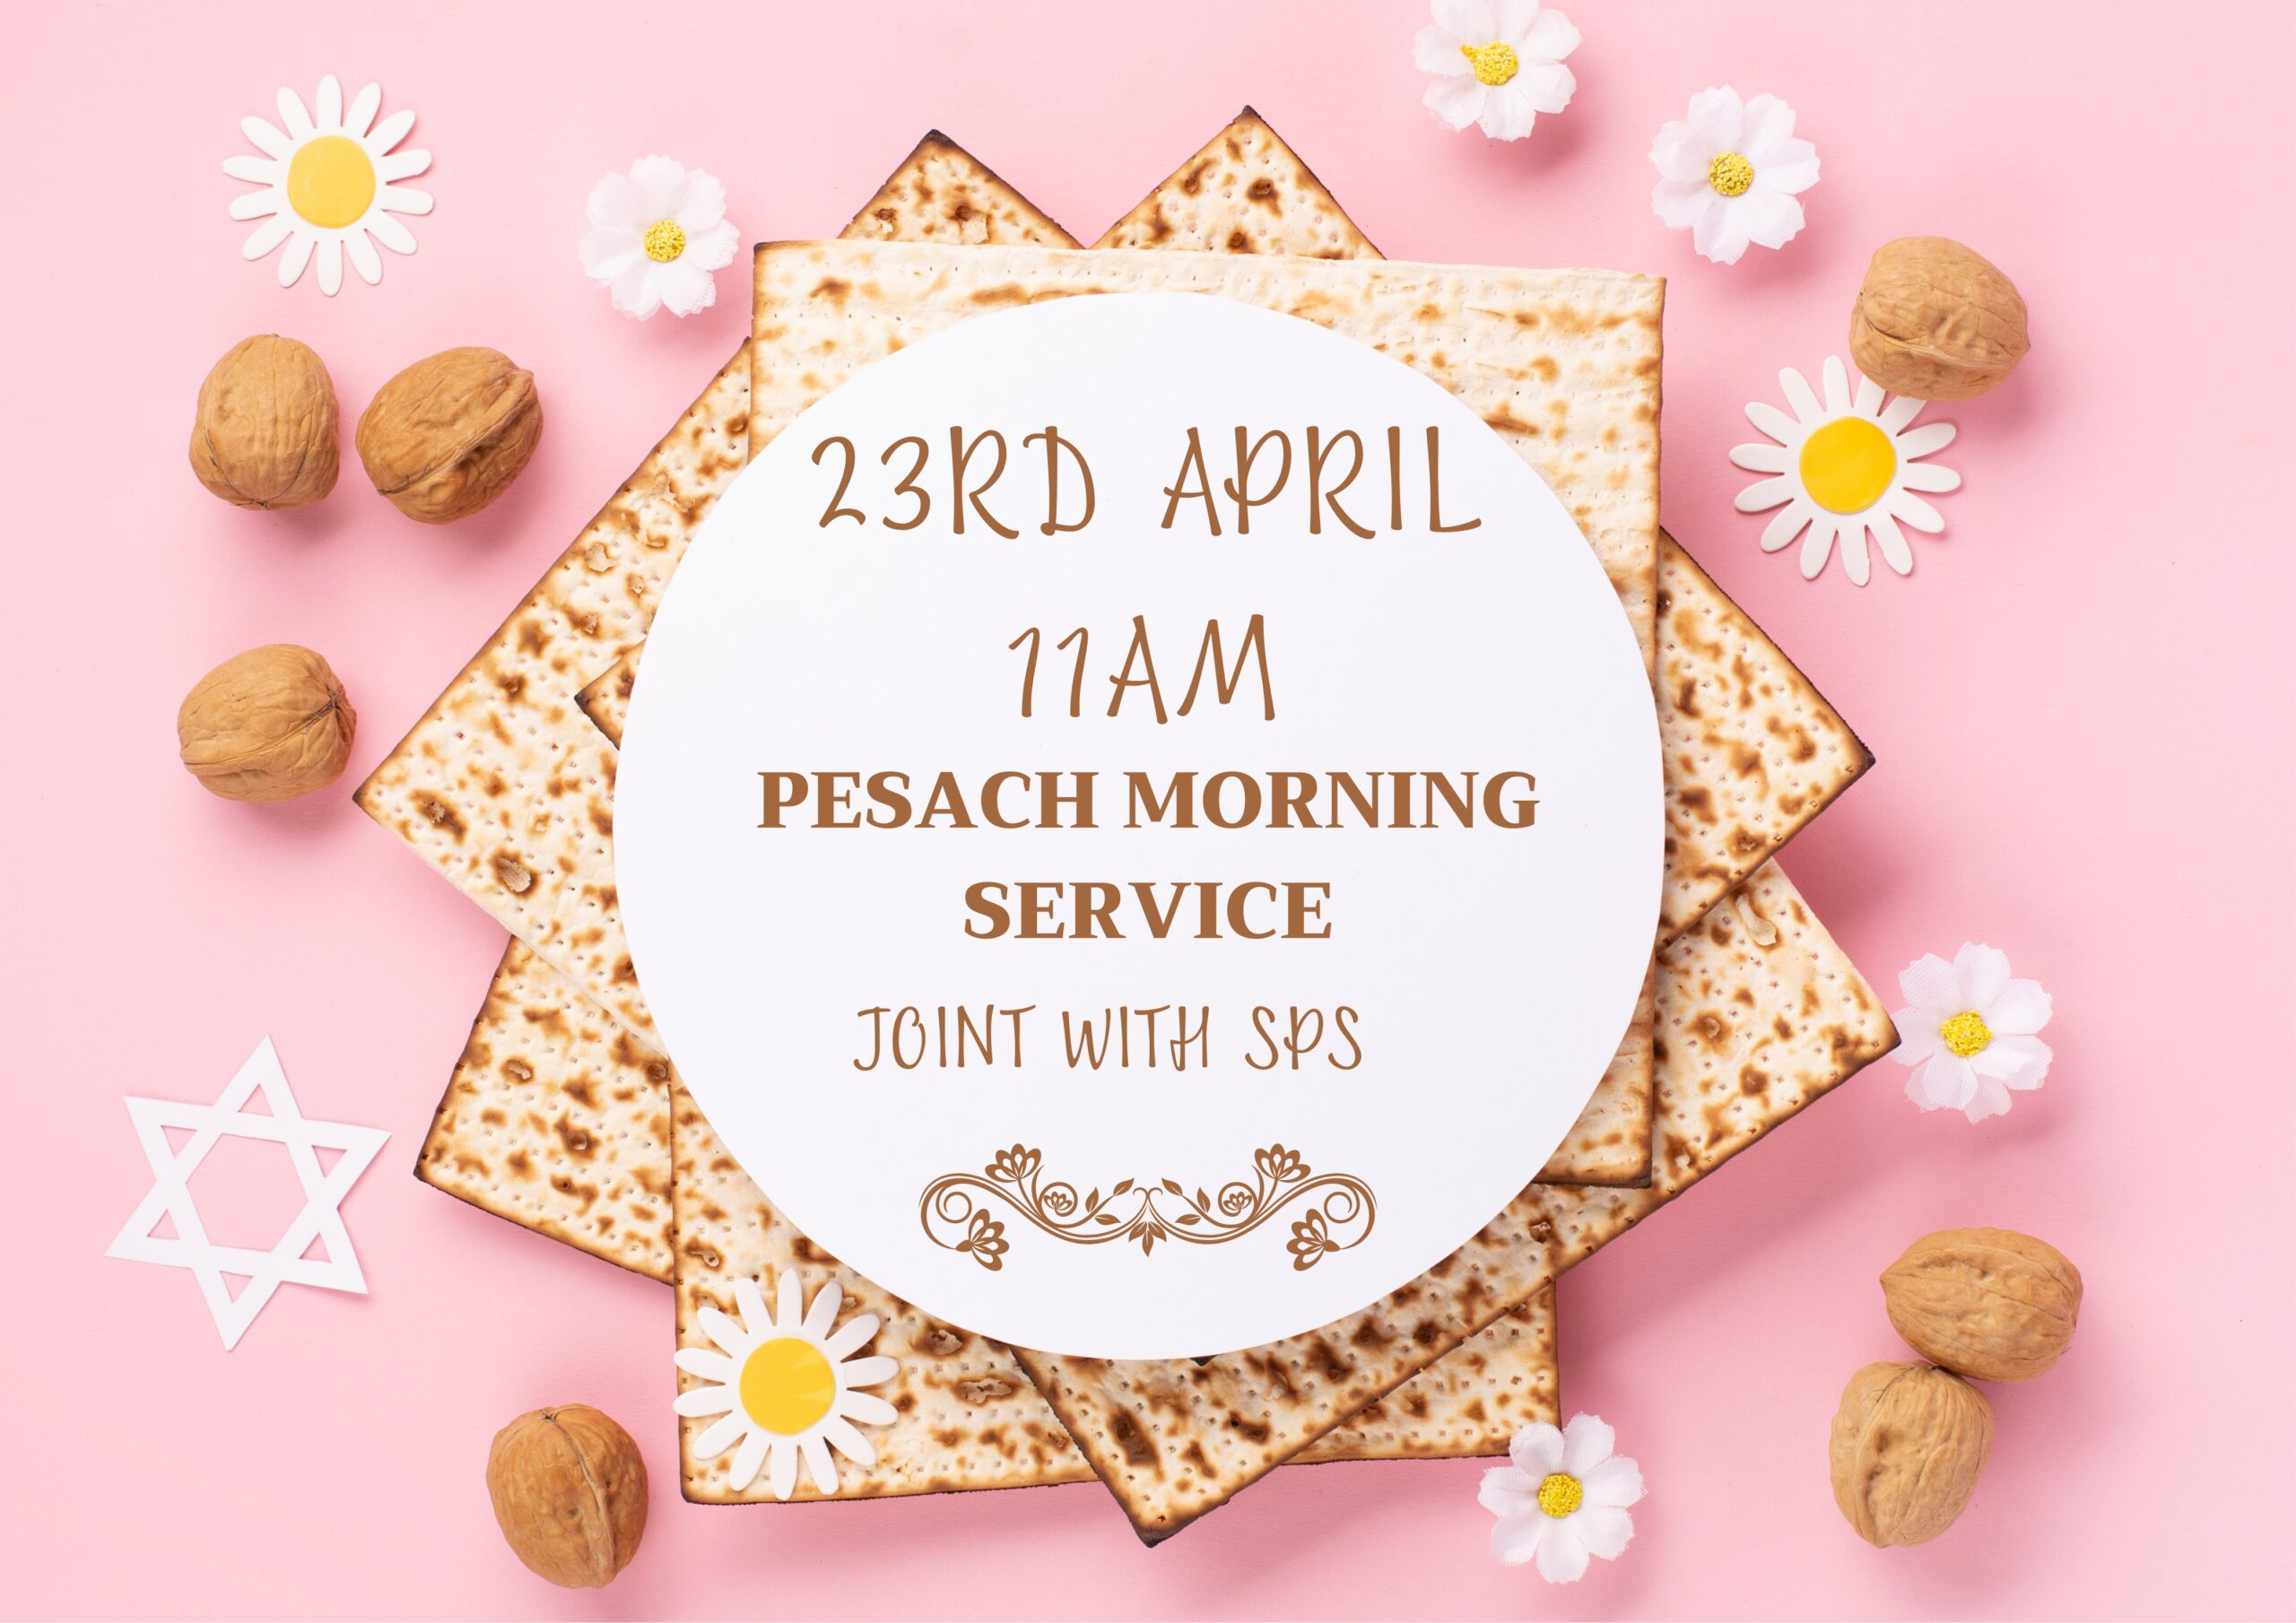 Pesach Morning Service